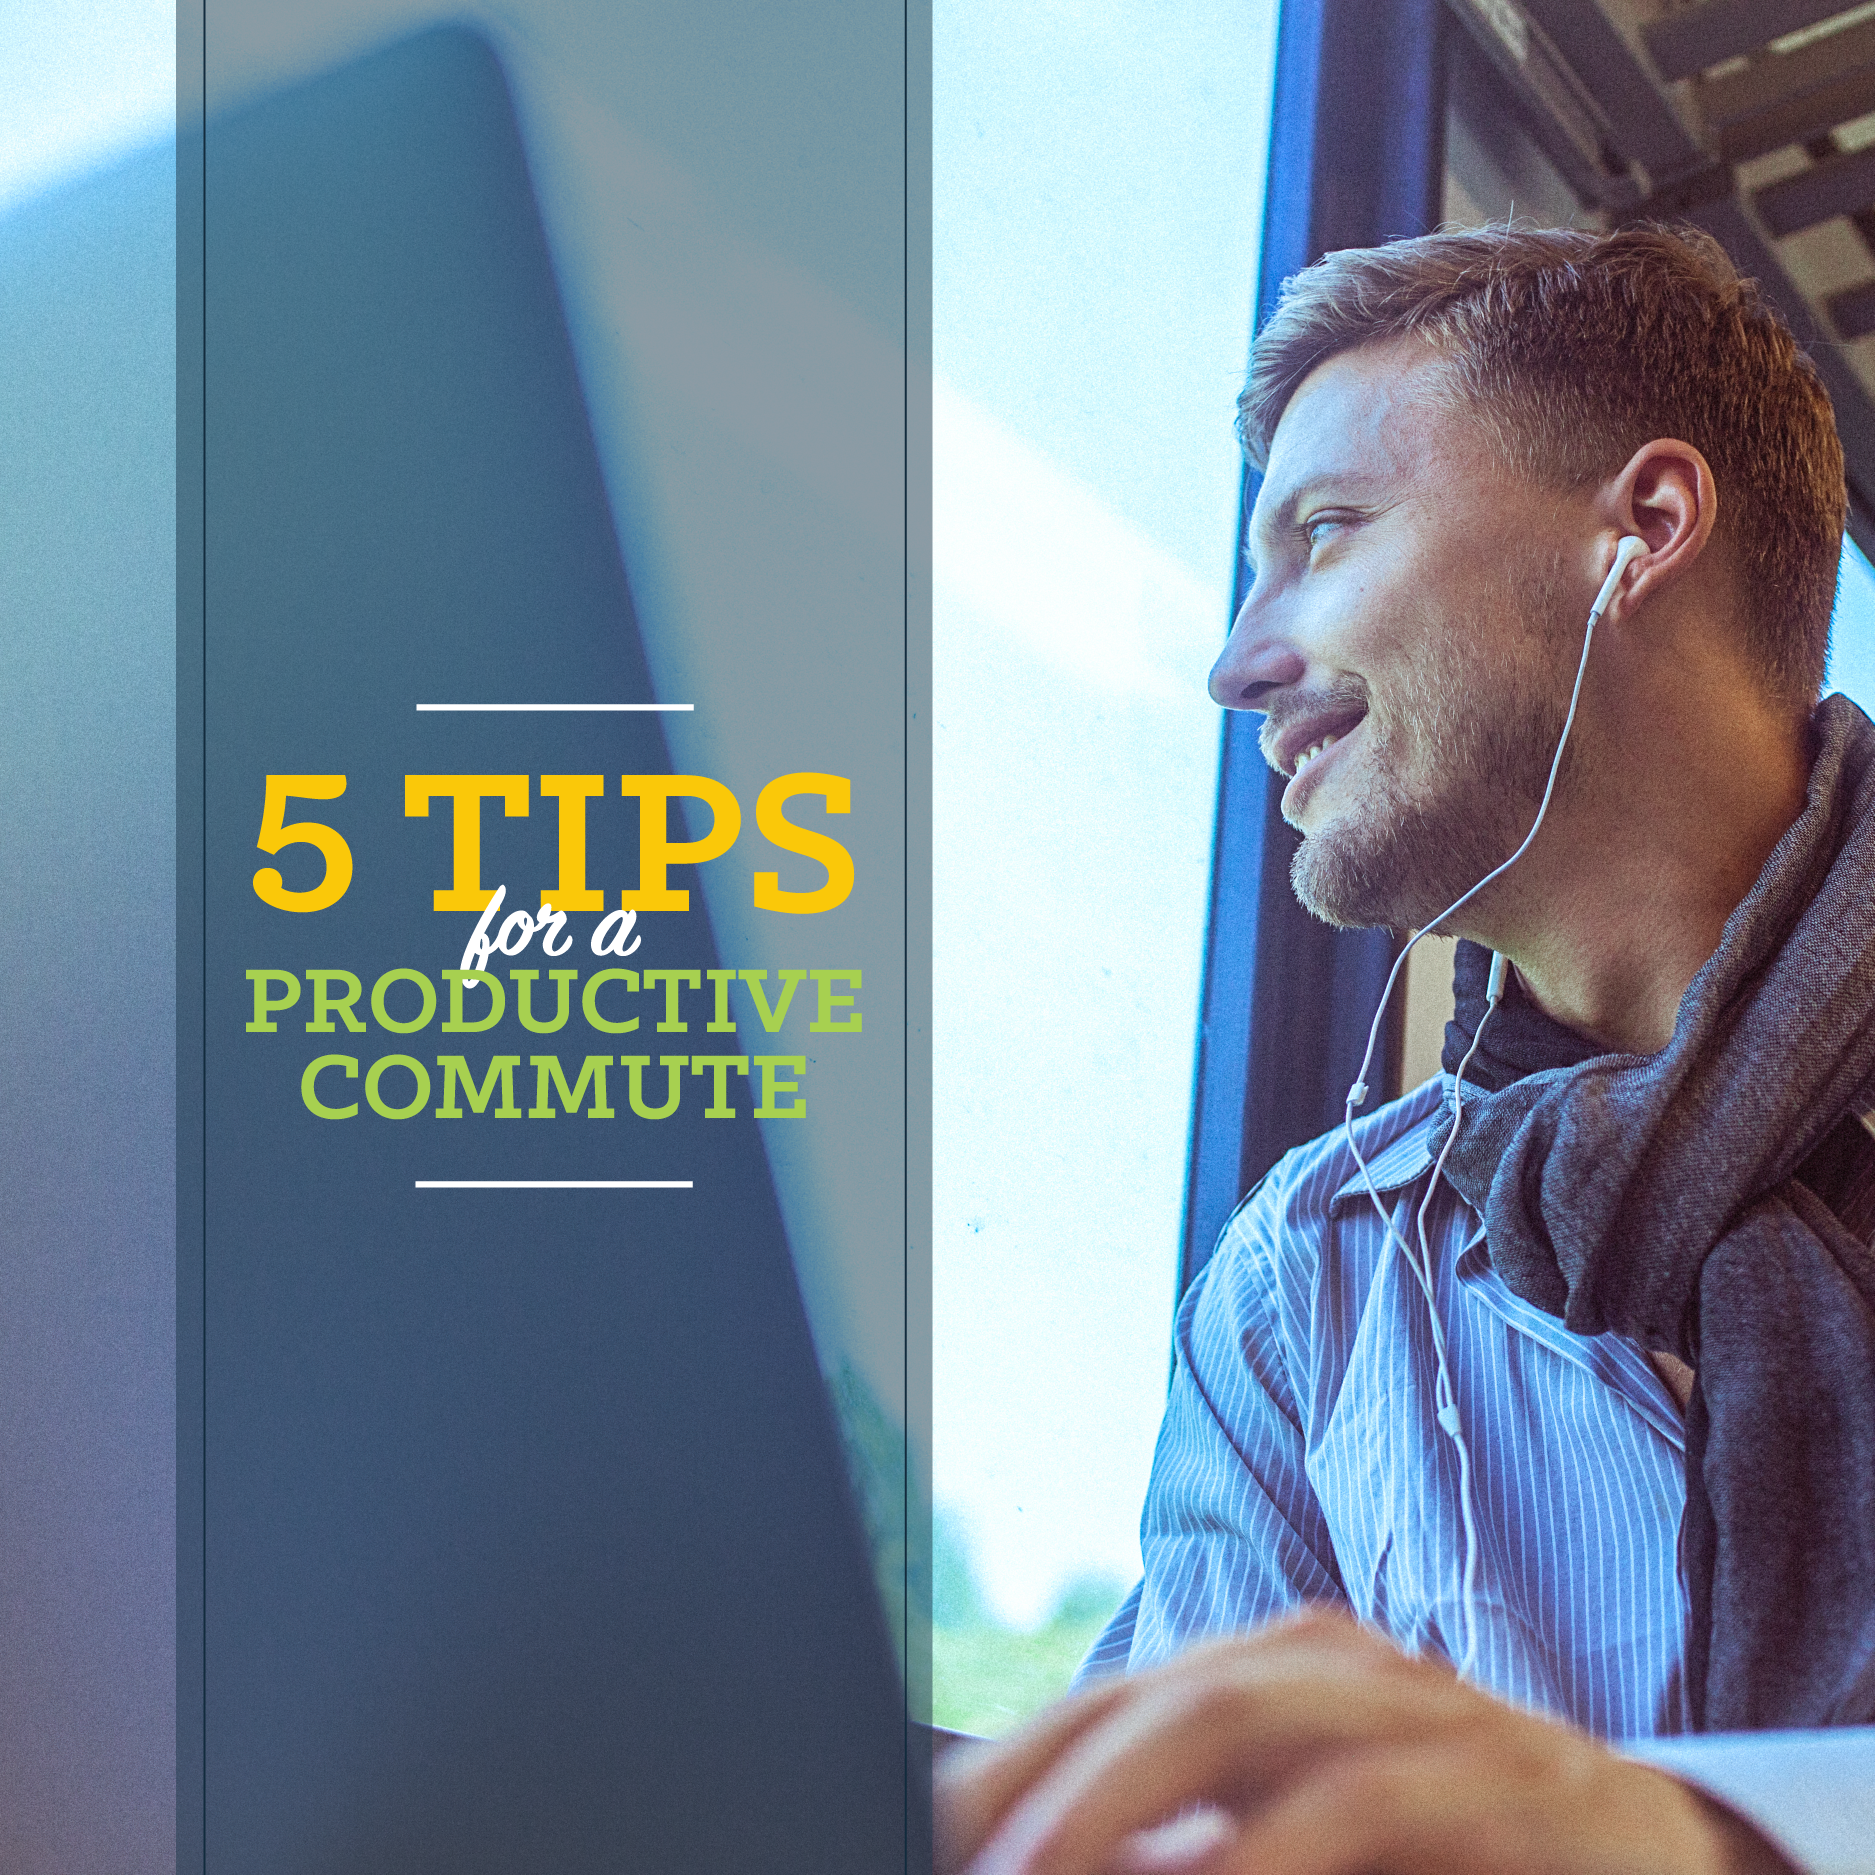 How to Be More Productive When Riding Public Transit